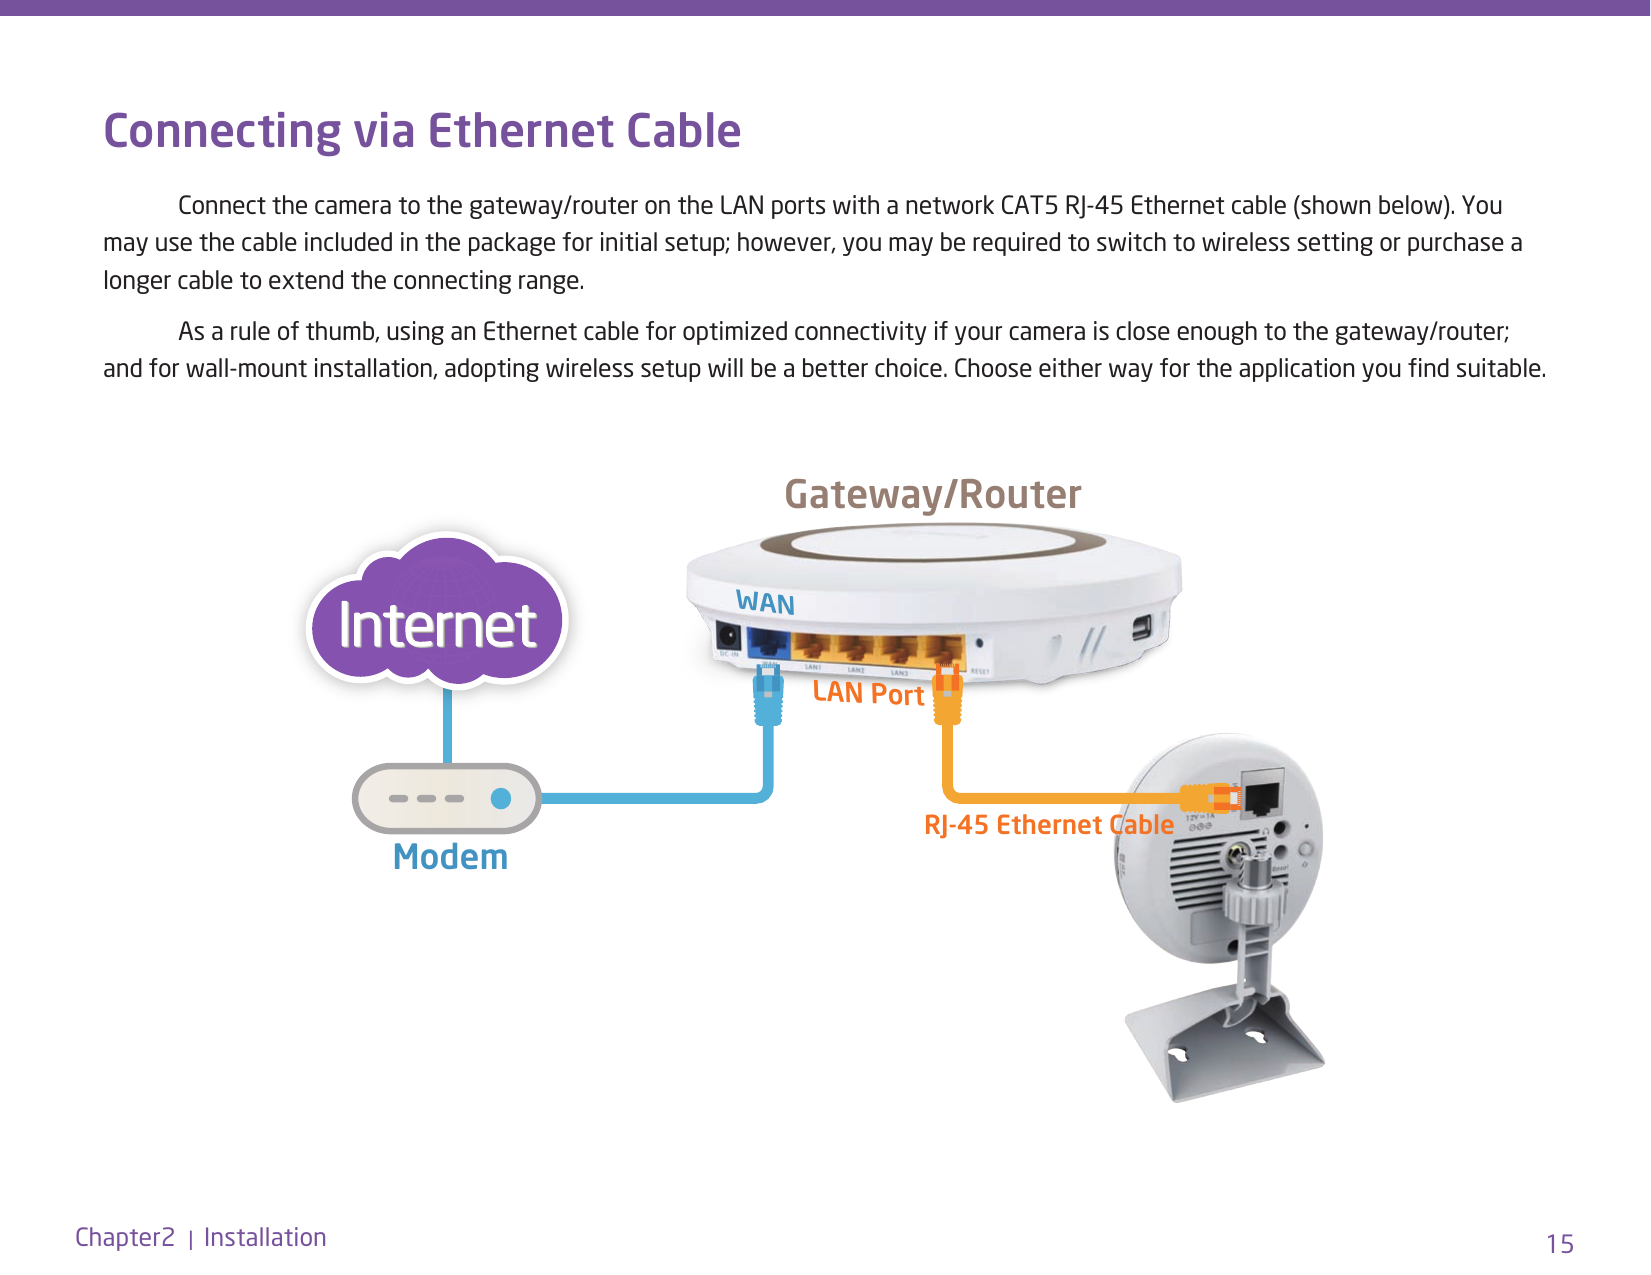 15Chapter2  |  InstallationConnecting via Ethernet Cable  Connect the camera to the gateway/router on the LAN ports with a network CAT5 RJ-45 Ethernet cable (shown below). You may use the cable included in the package for initial setup; however, you may be required to switch to wireless setting or purchase a longer cable to extend the connecting range.   As a rule of thumb, using an Ethernet cable for optimized connectivity if your camera is close enough to the gateway/router; and for wall-mount installation, adopting wireless setup will be a better choice. Choose either way for the application you nd suitable. WANRJ-45 Ethernet CableGateway/RouterLAN PortModem